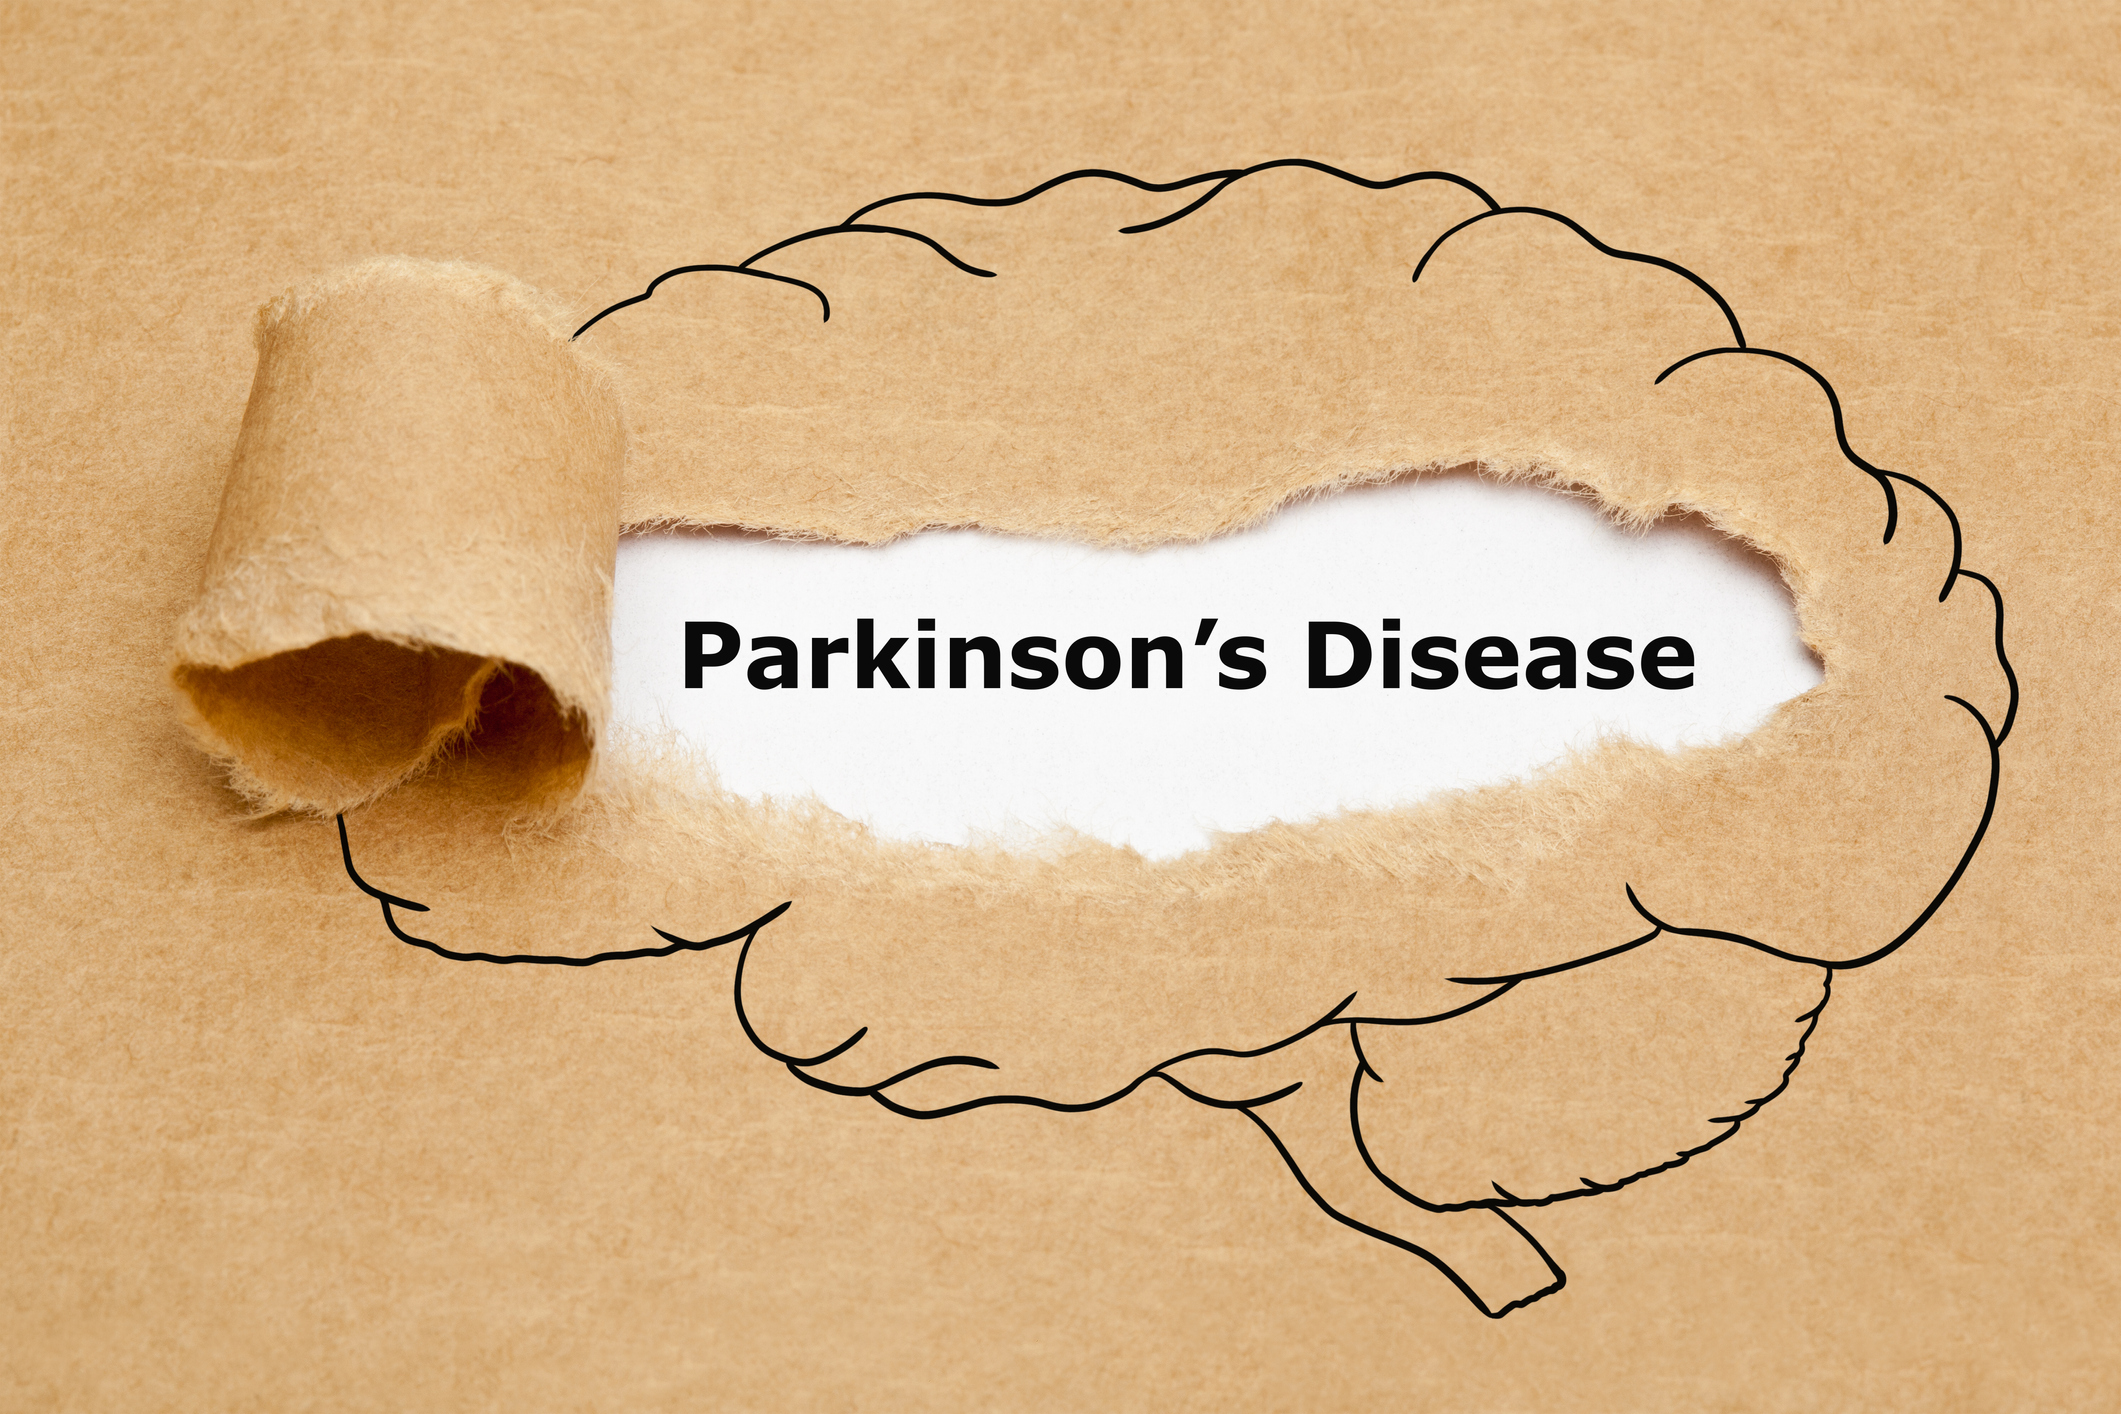 The ‘invisible’ chemical increasing Parkinson’s diagnoses